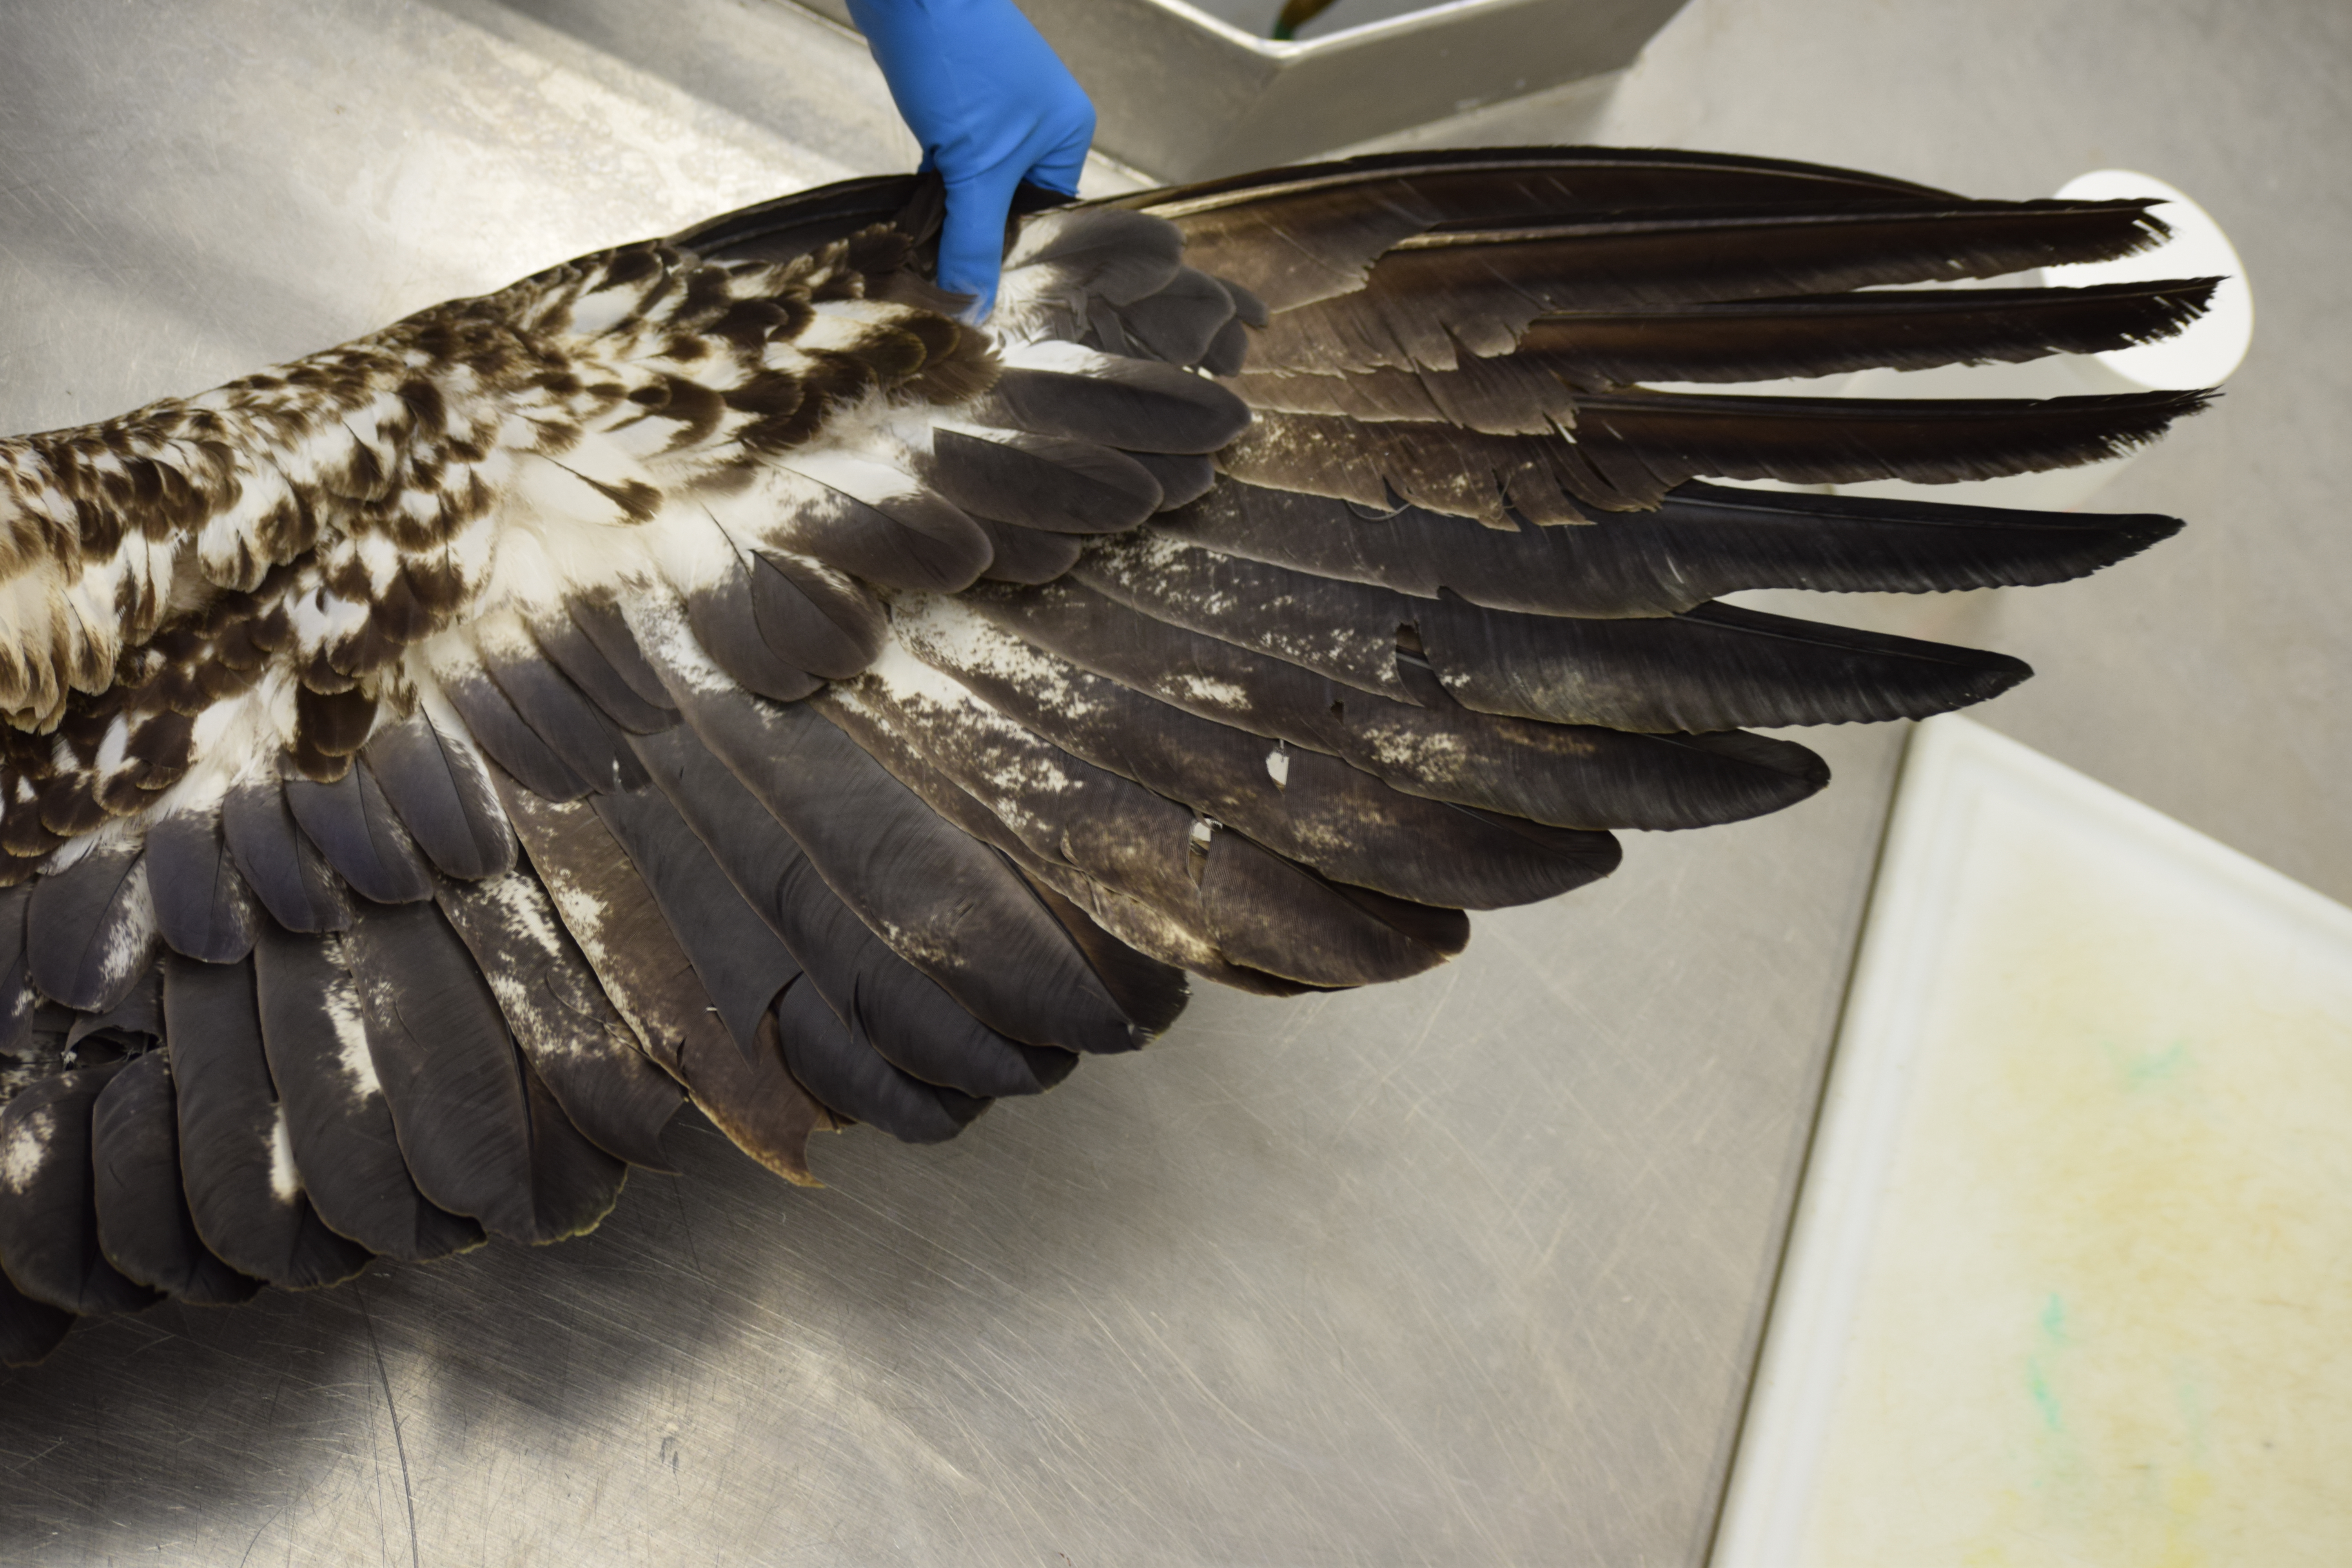 Bald eagle plumage being examined by a wildlife pathologist; plumage is often used to determine age